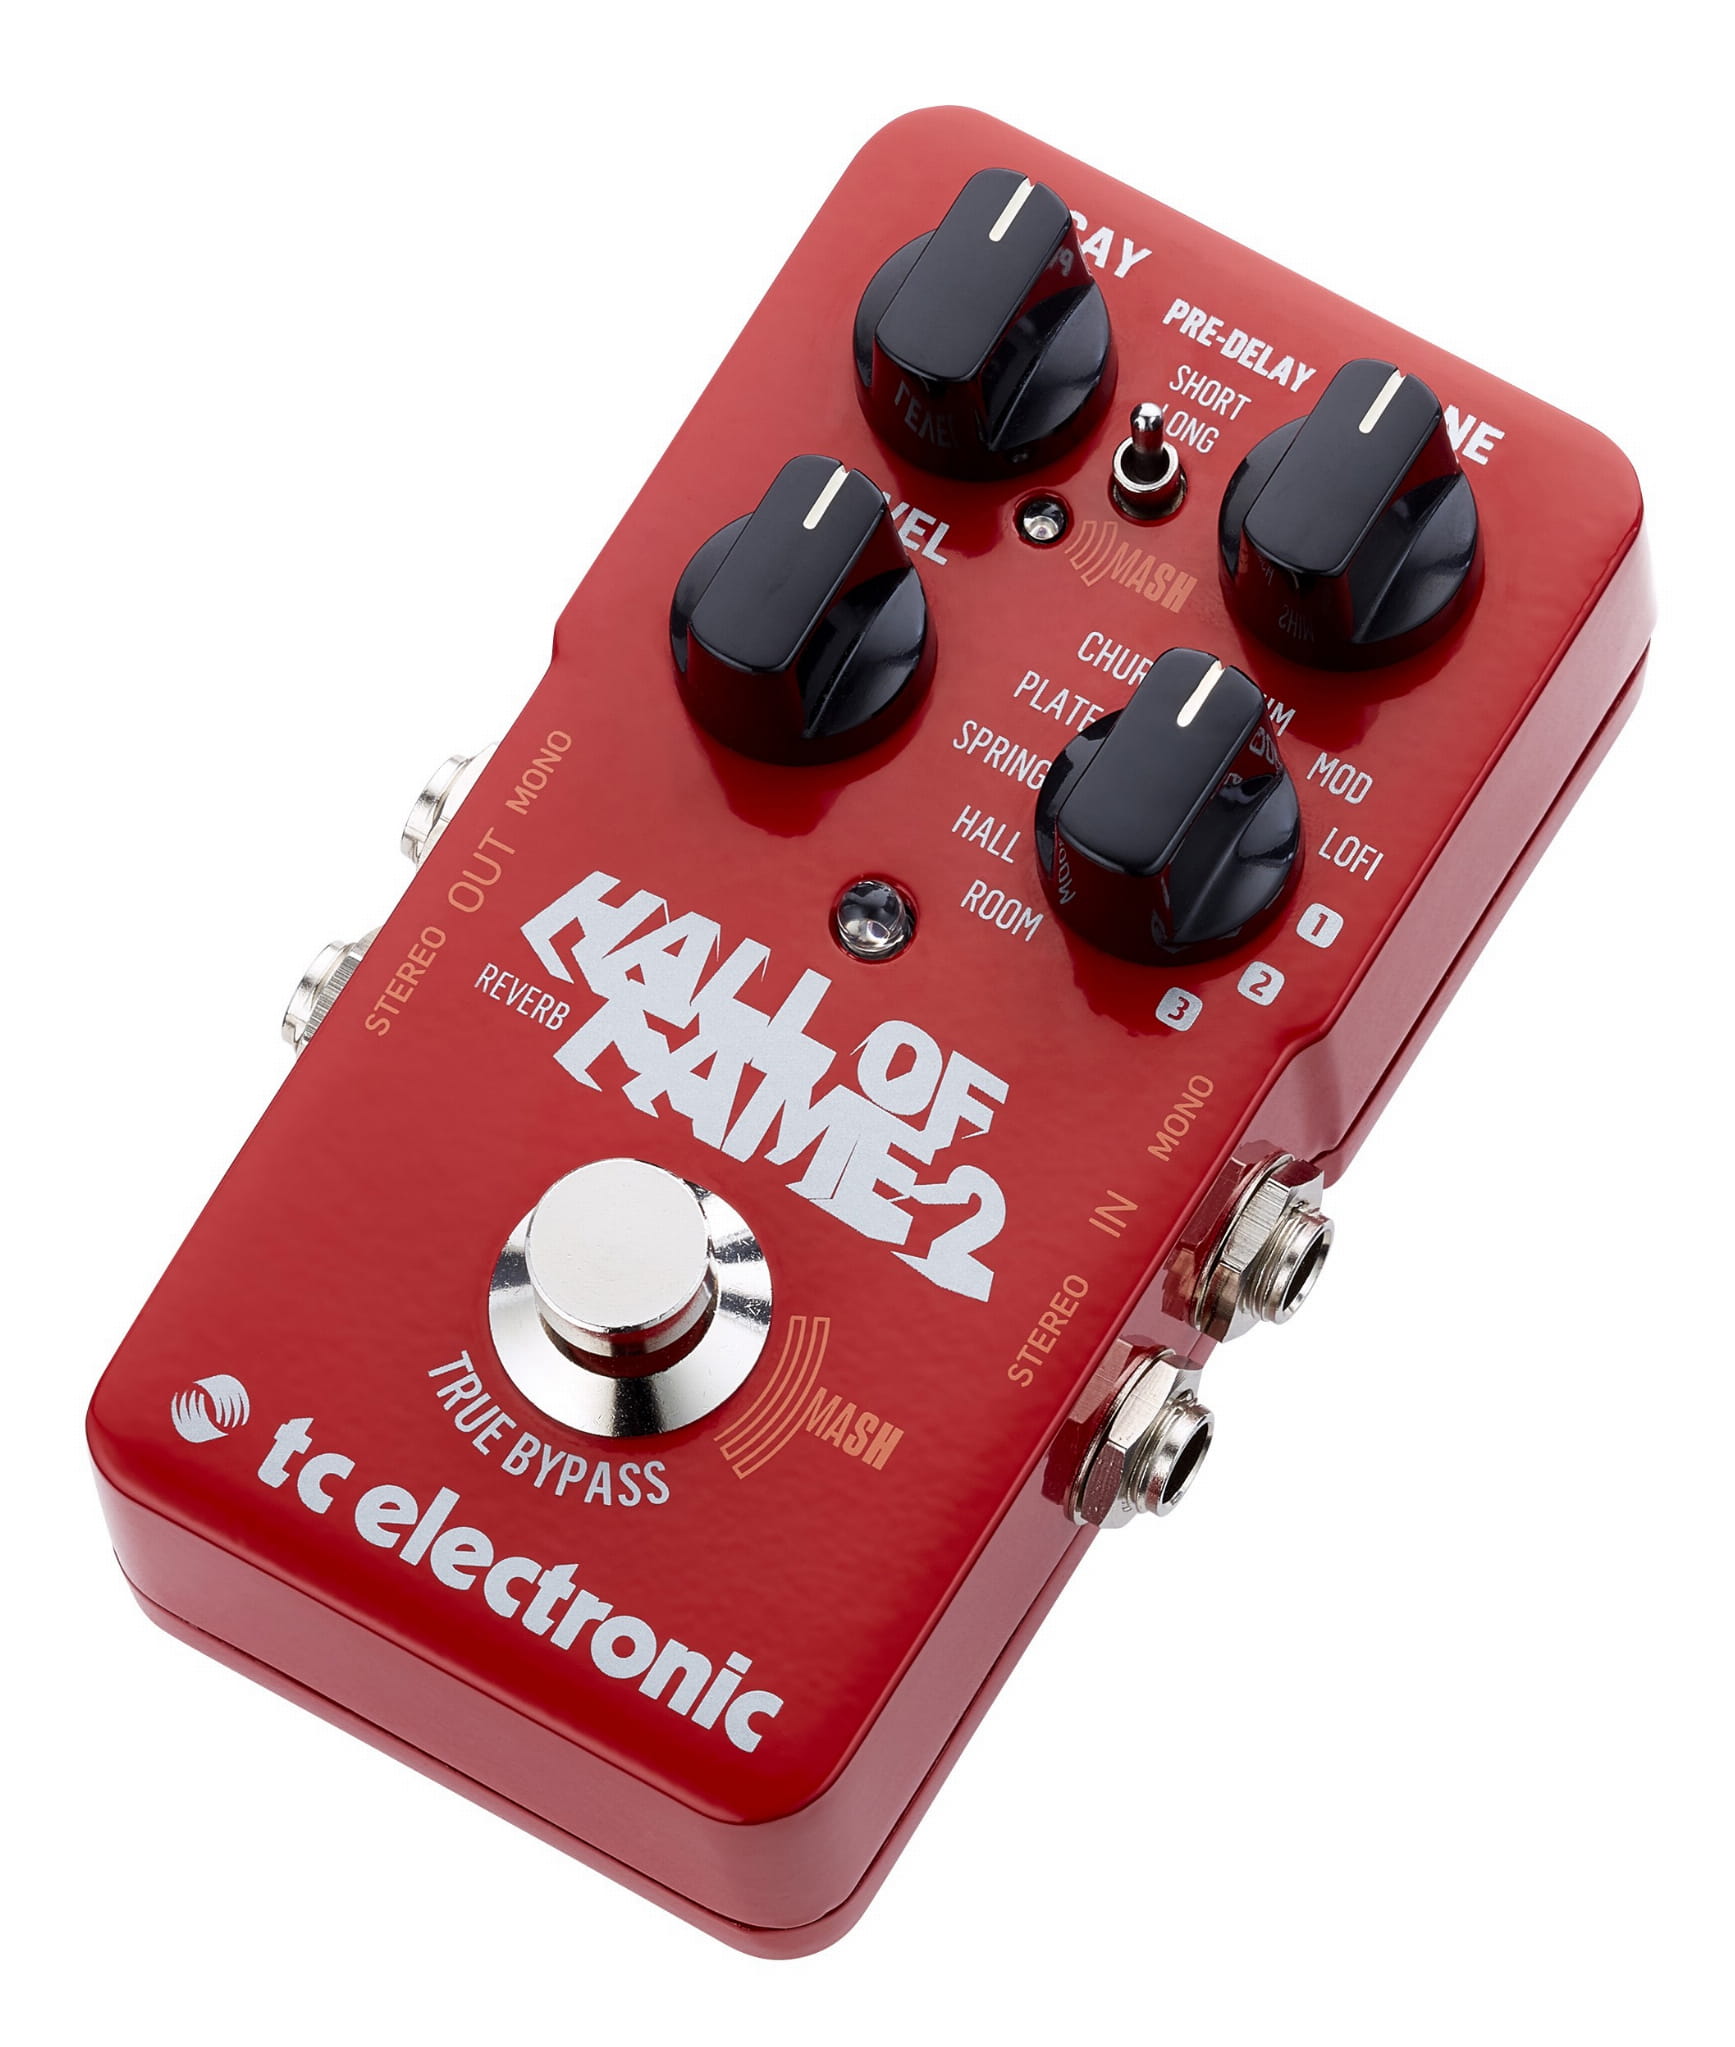 TC Electronic Hall of Fame 2 Reverb